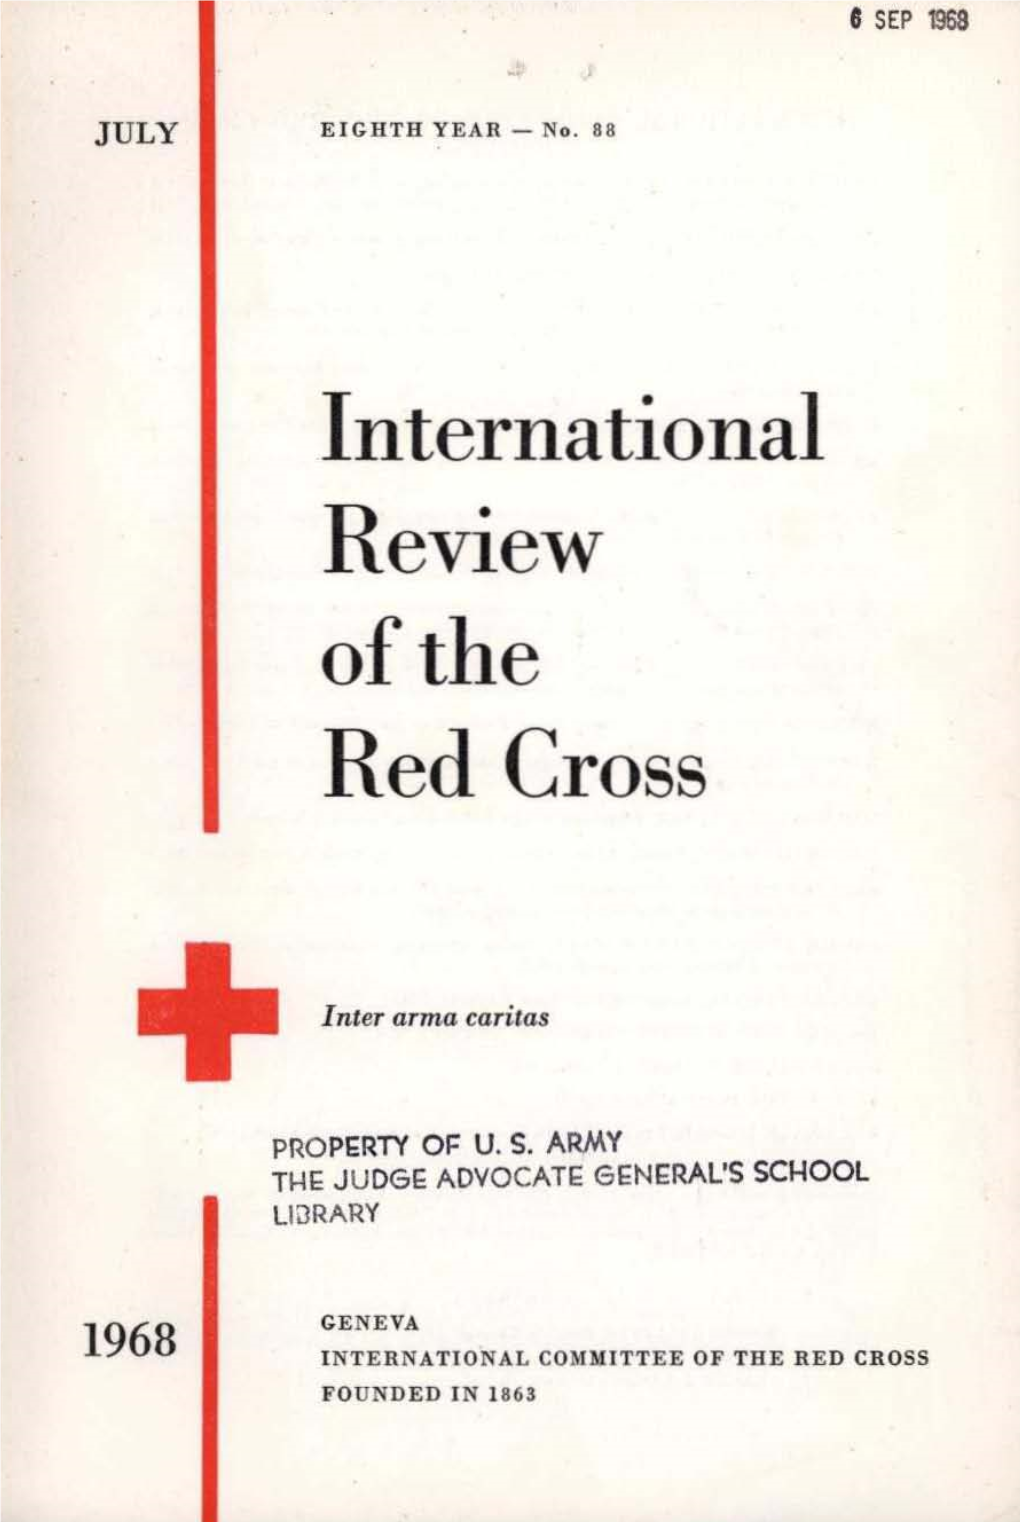 International Review of the Red Cross, July 1968, Eighth Year